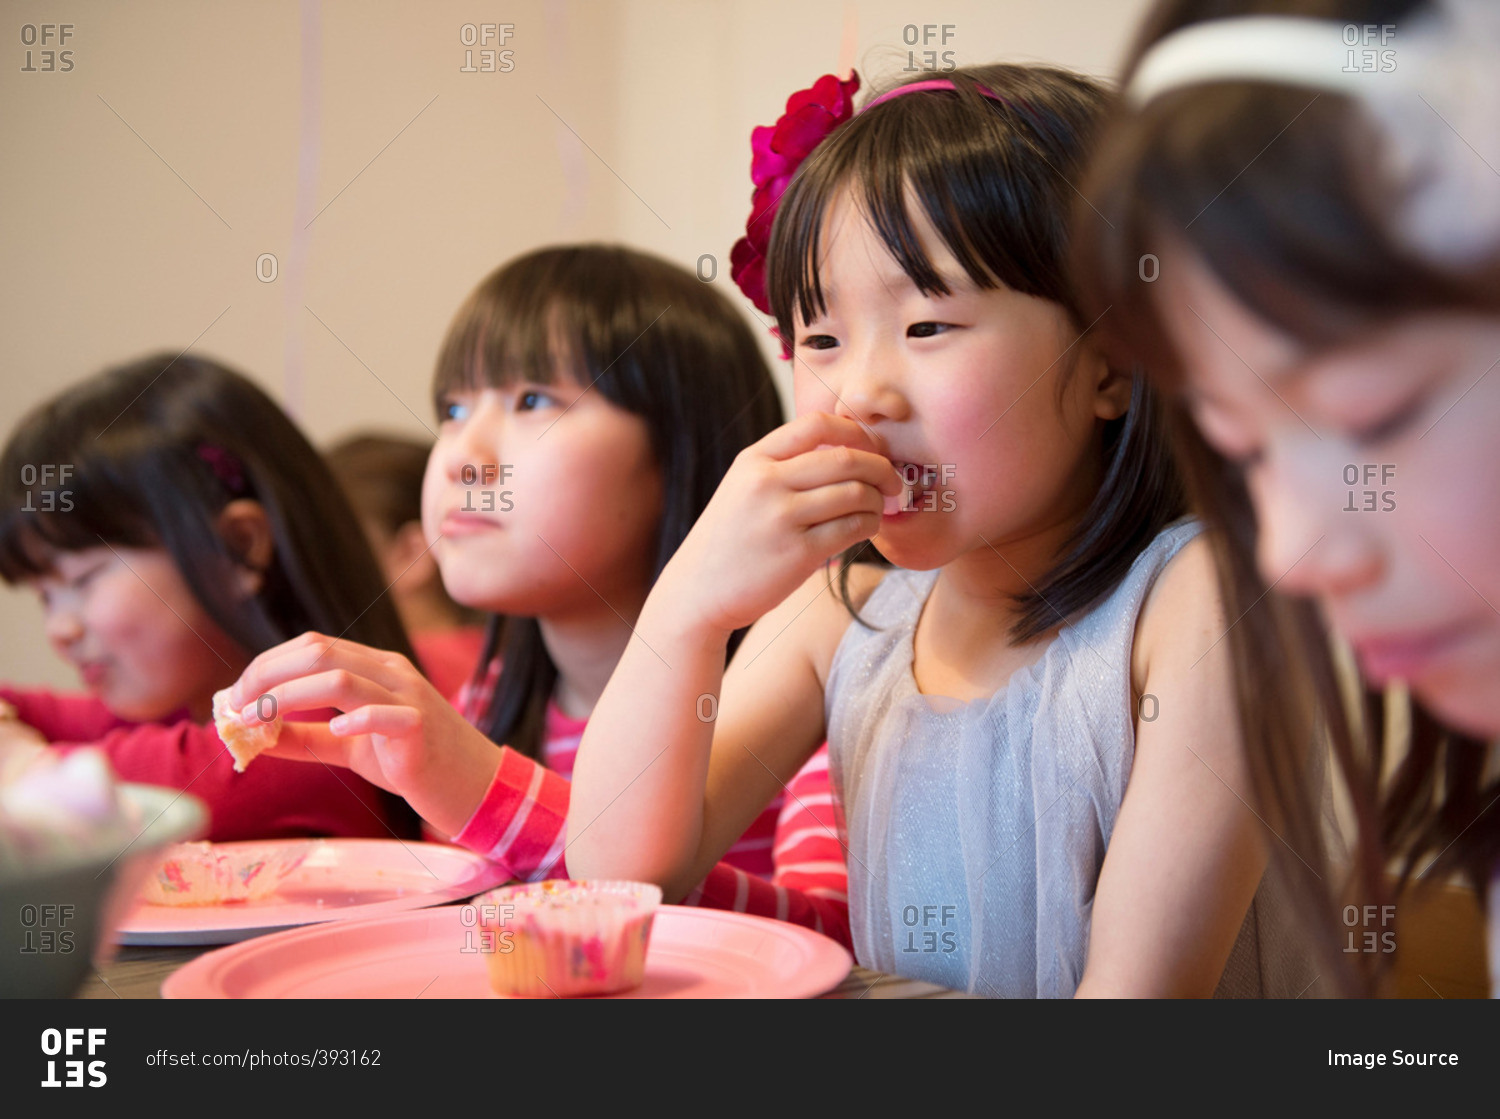 Girl's eating fairy cakes at party